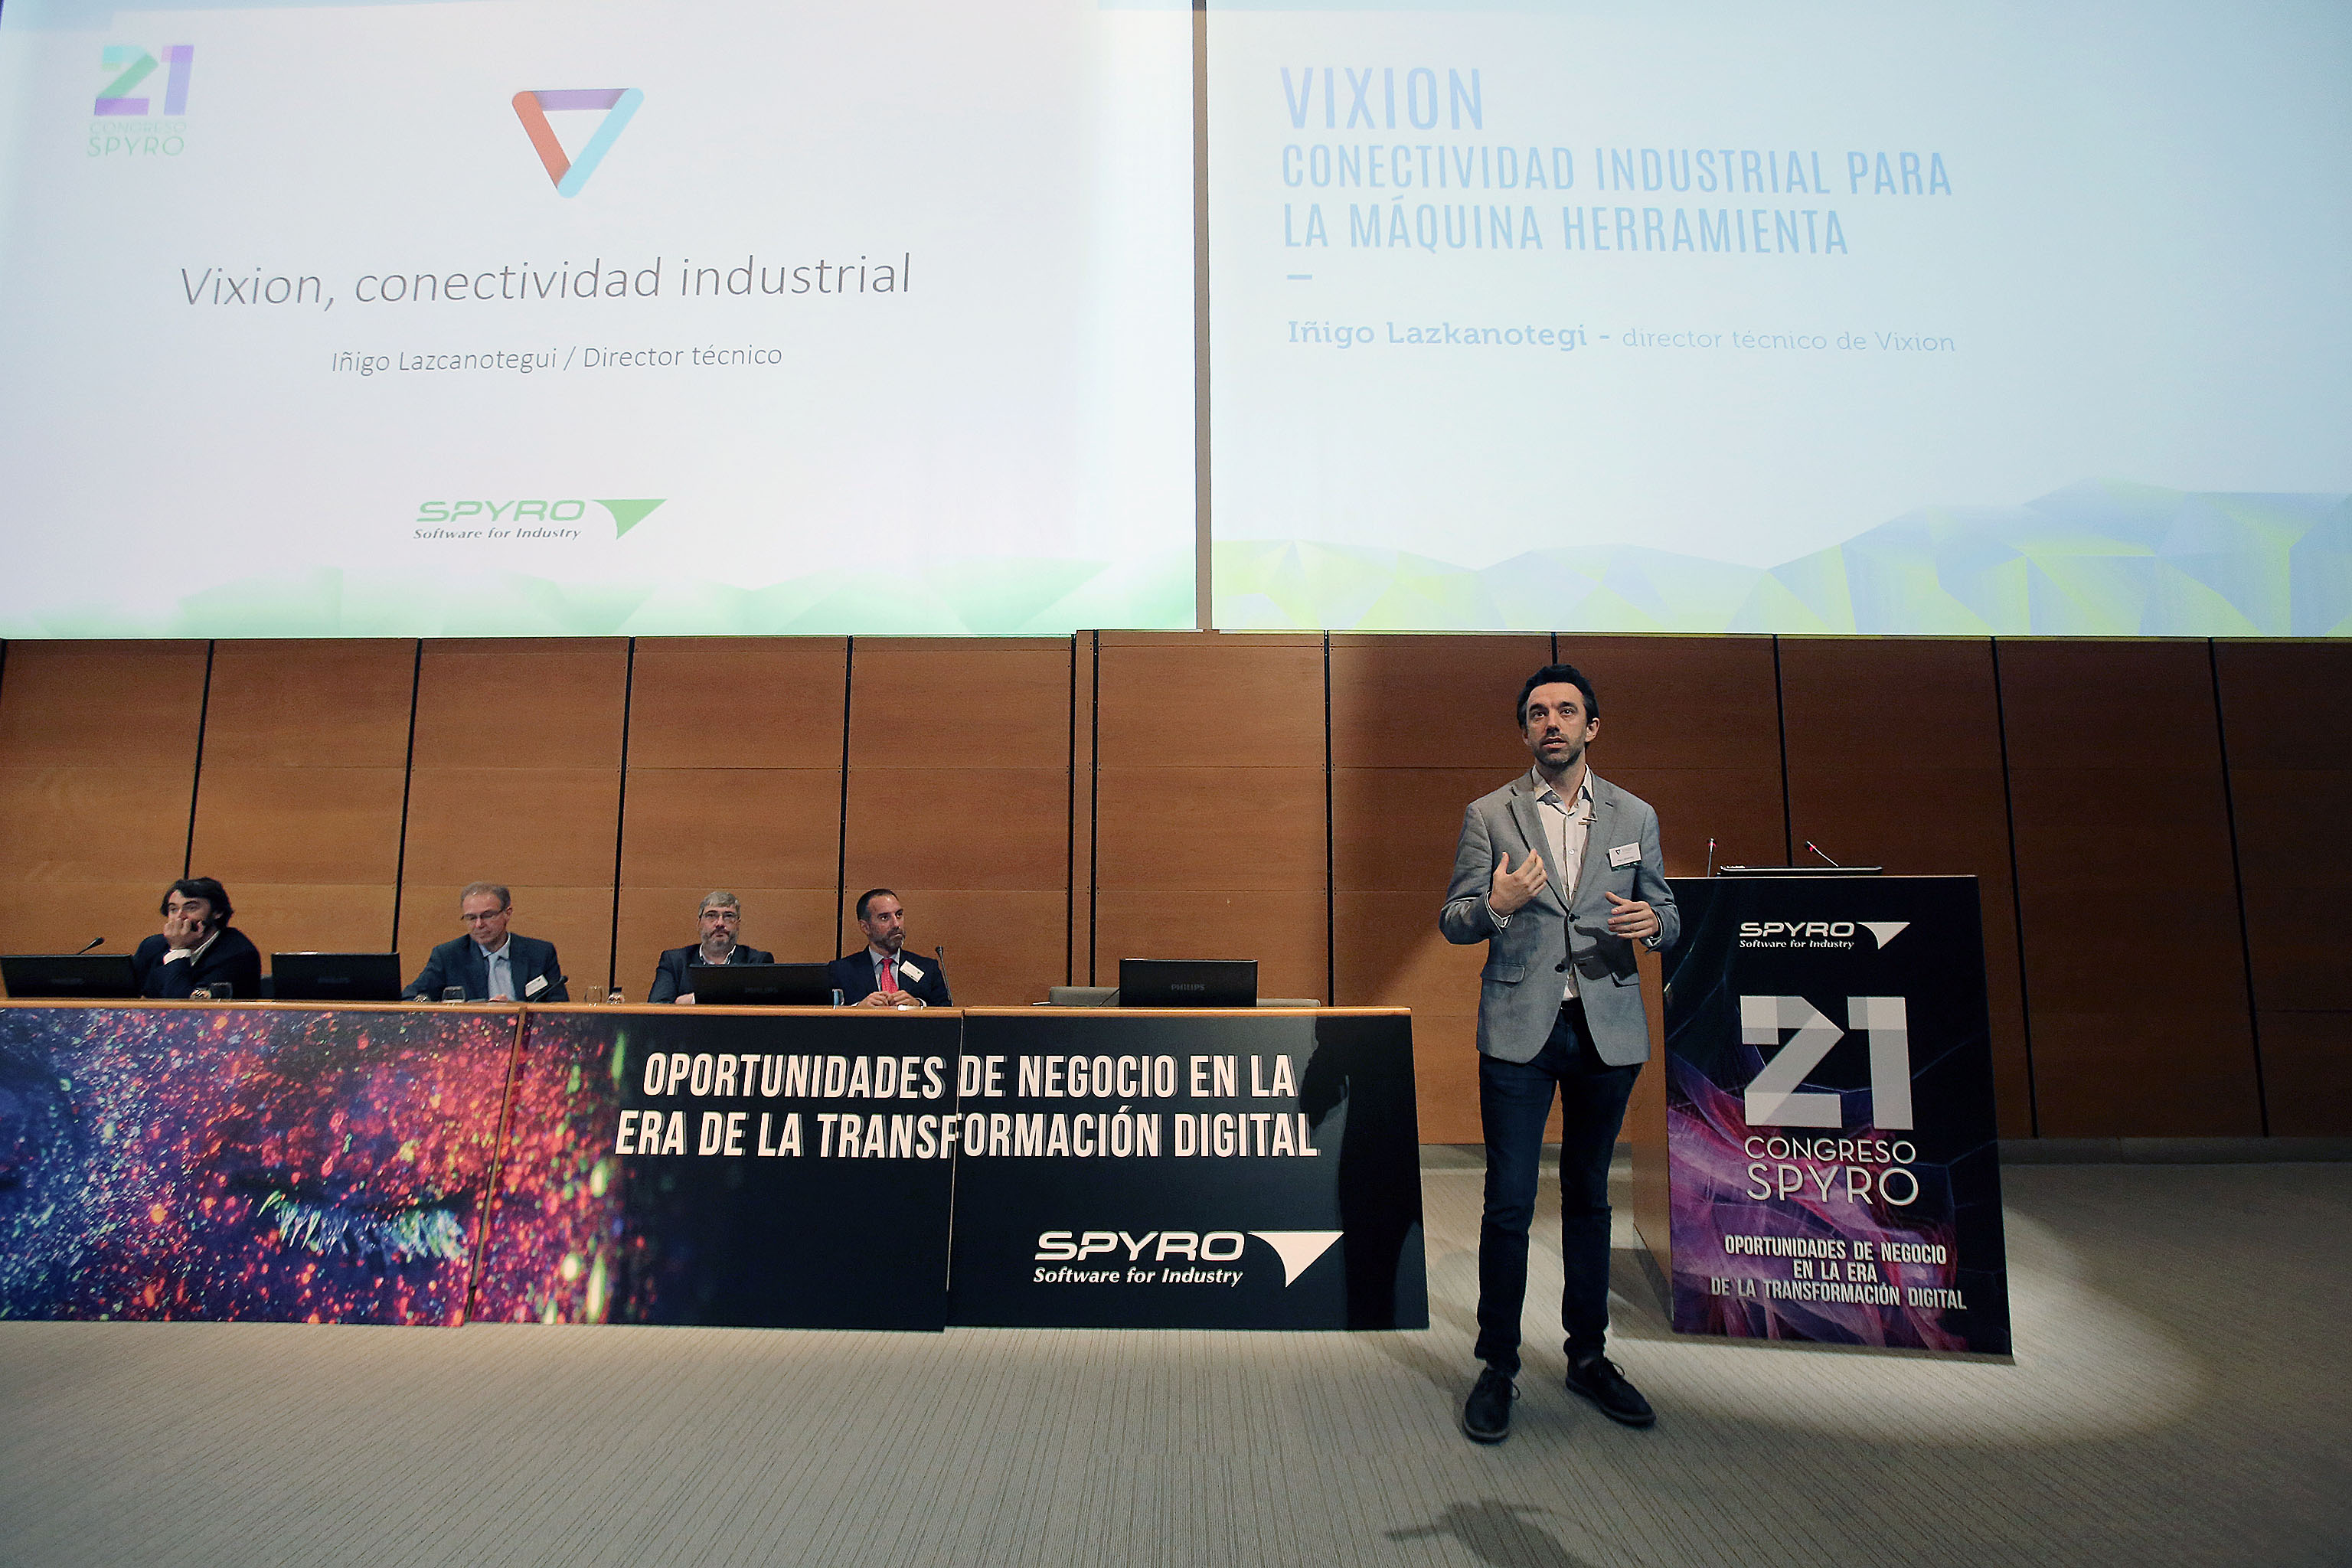 VIXION-SPYRO draws over 200 professionals to San Sebastian to learn about the digital transformation of organisations